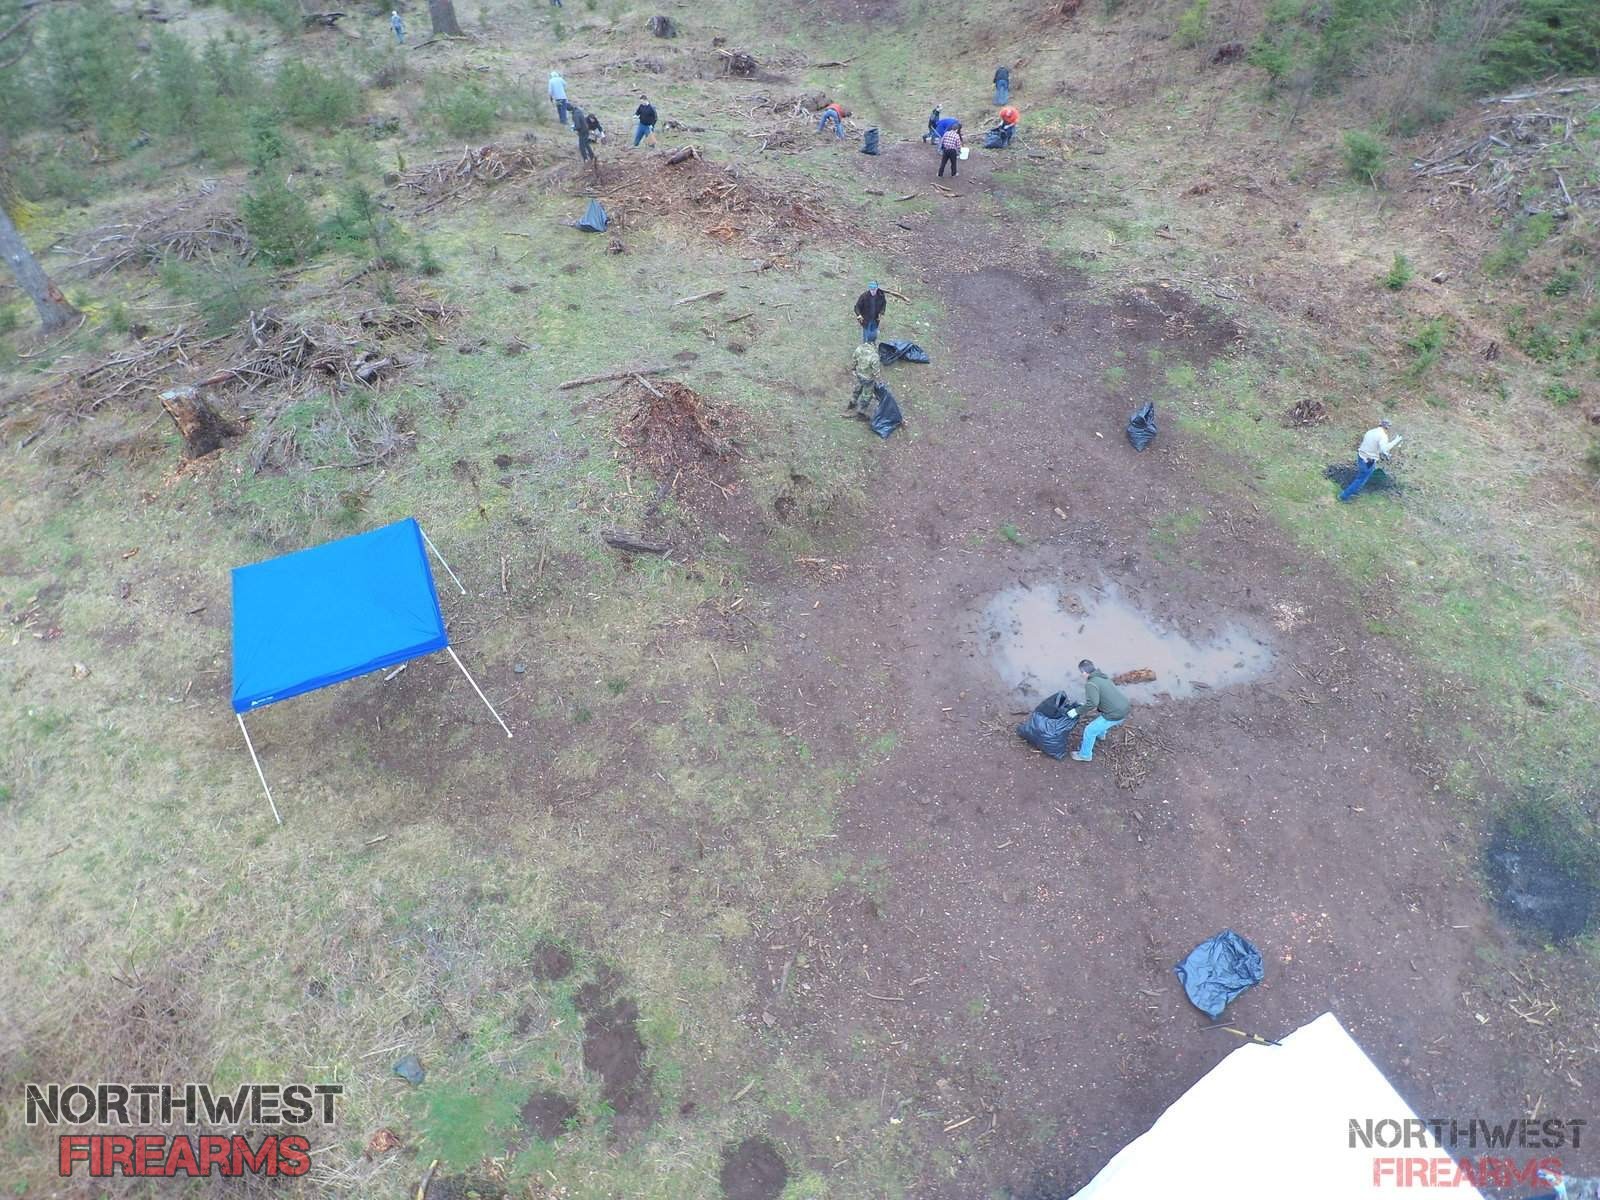 Aerial Photos Of the Cleanup